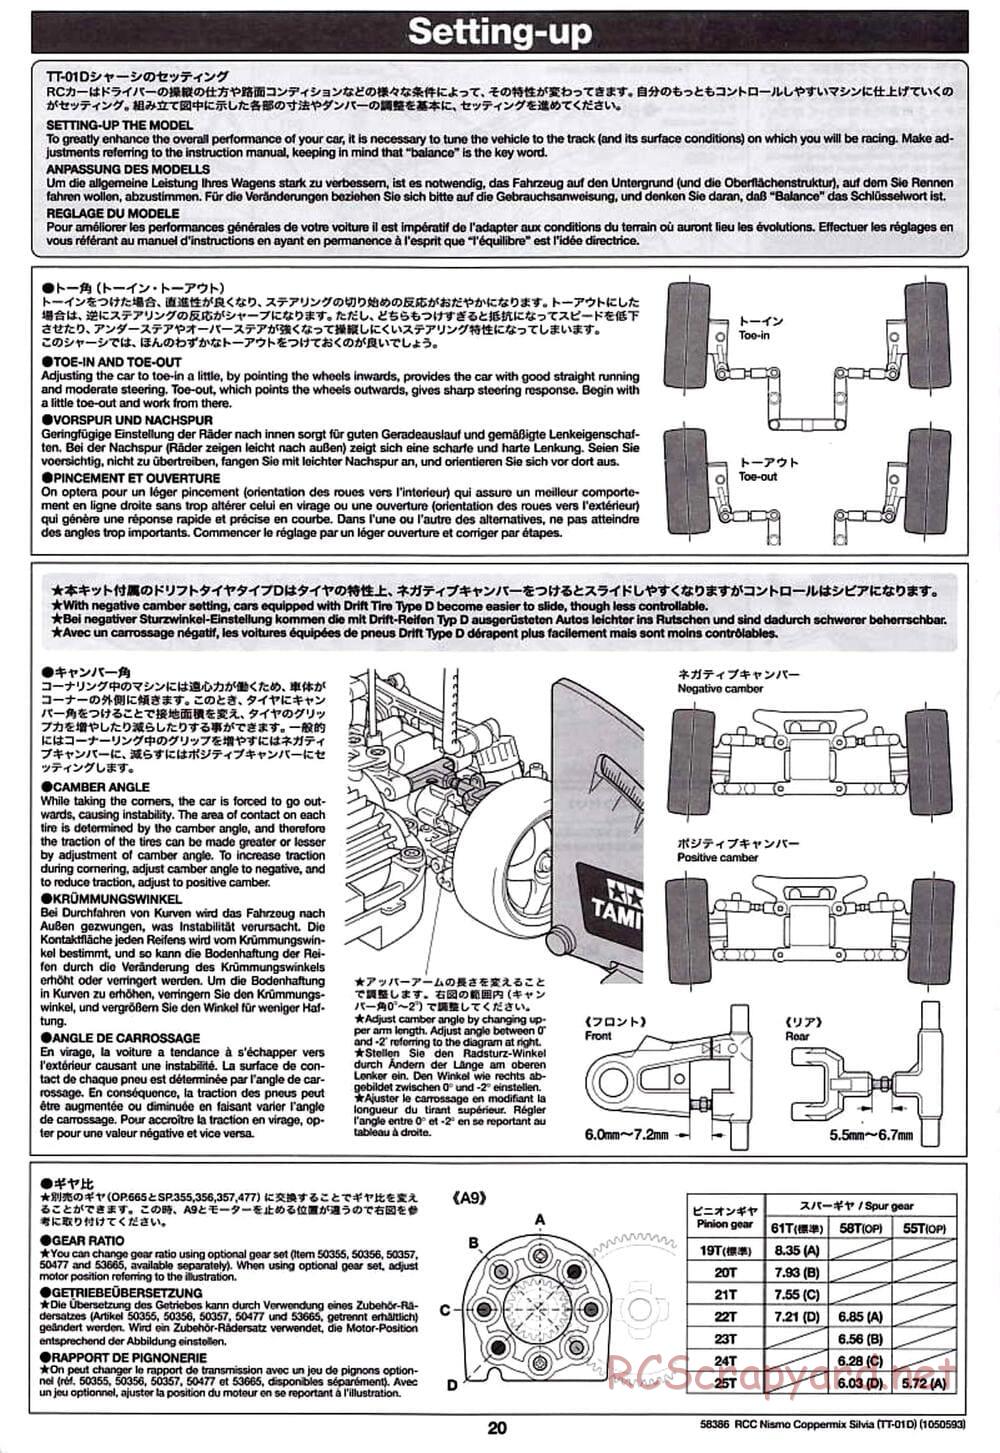 Tamiya - Nismo Coppermix Silvia Drift Spec - TT-01D Chassis - Manual - Page 20